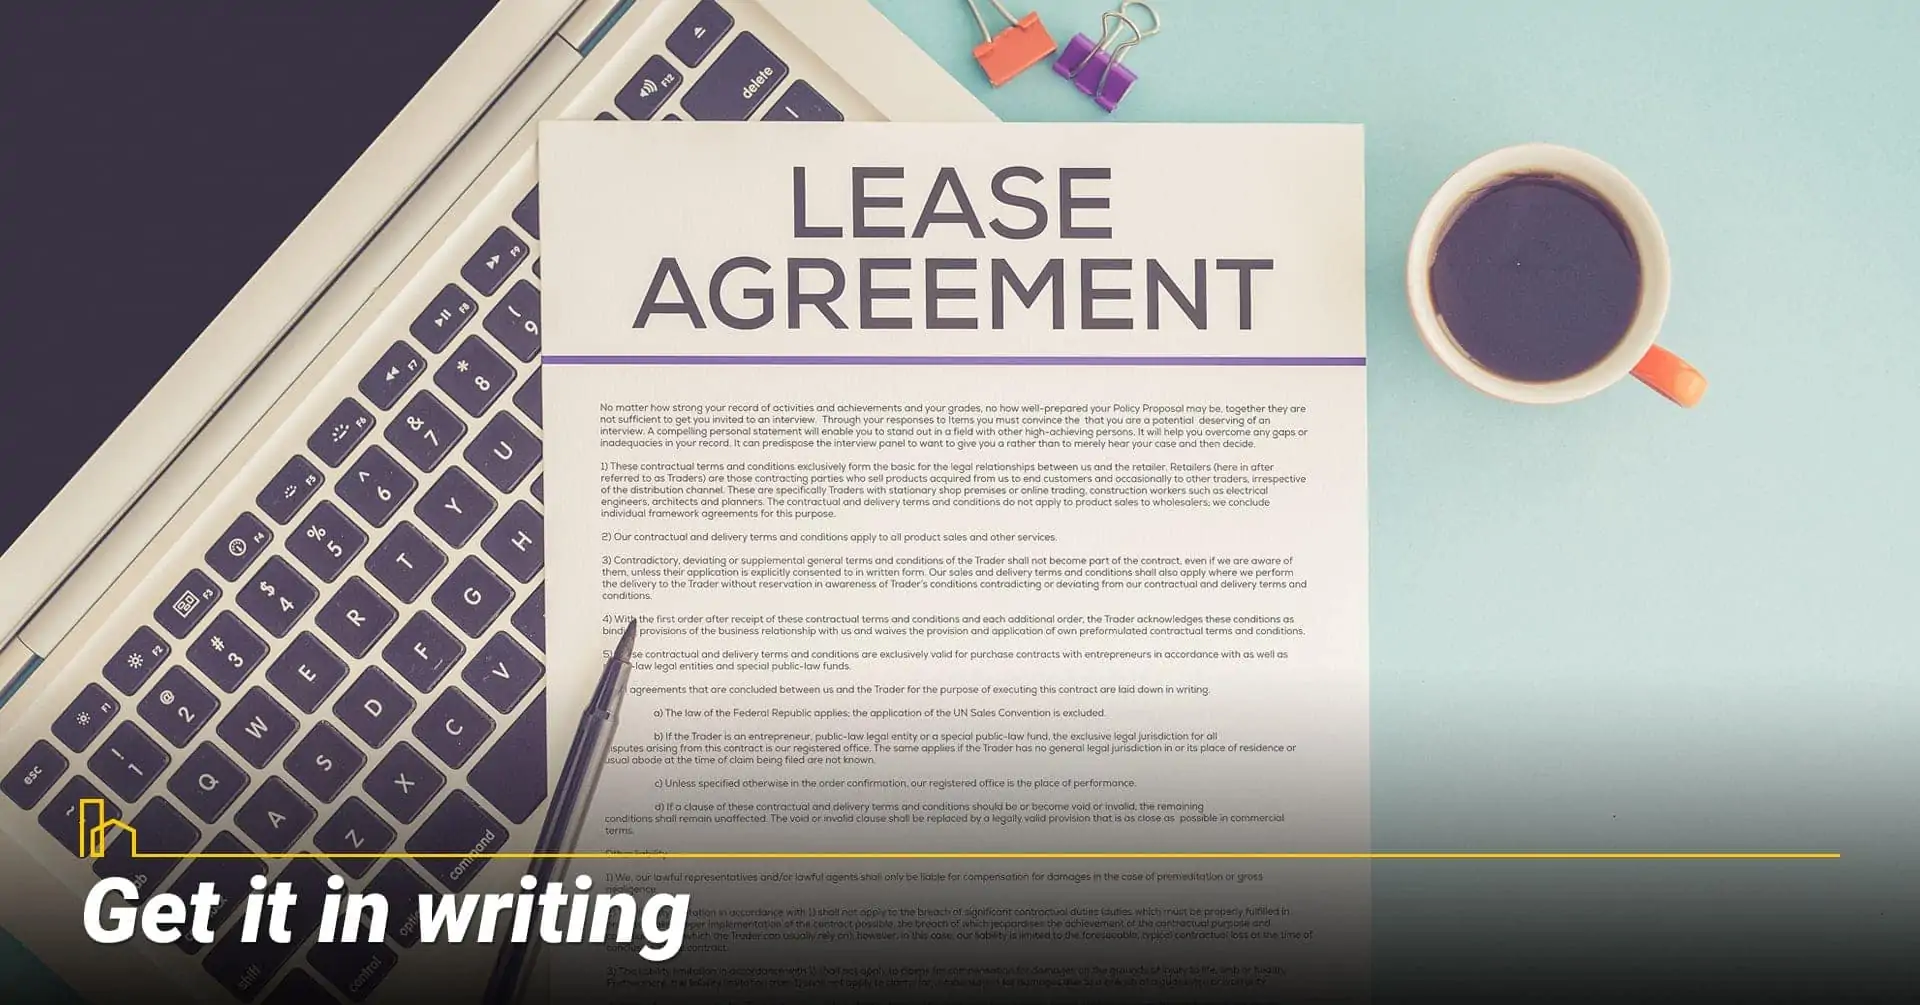 Get it in writing, make sure to use lease agreement